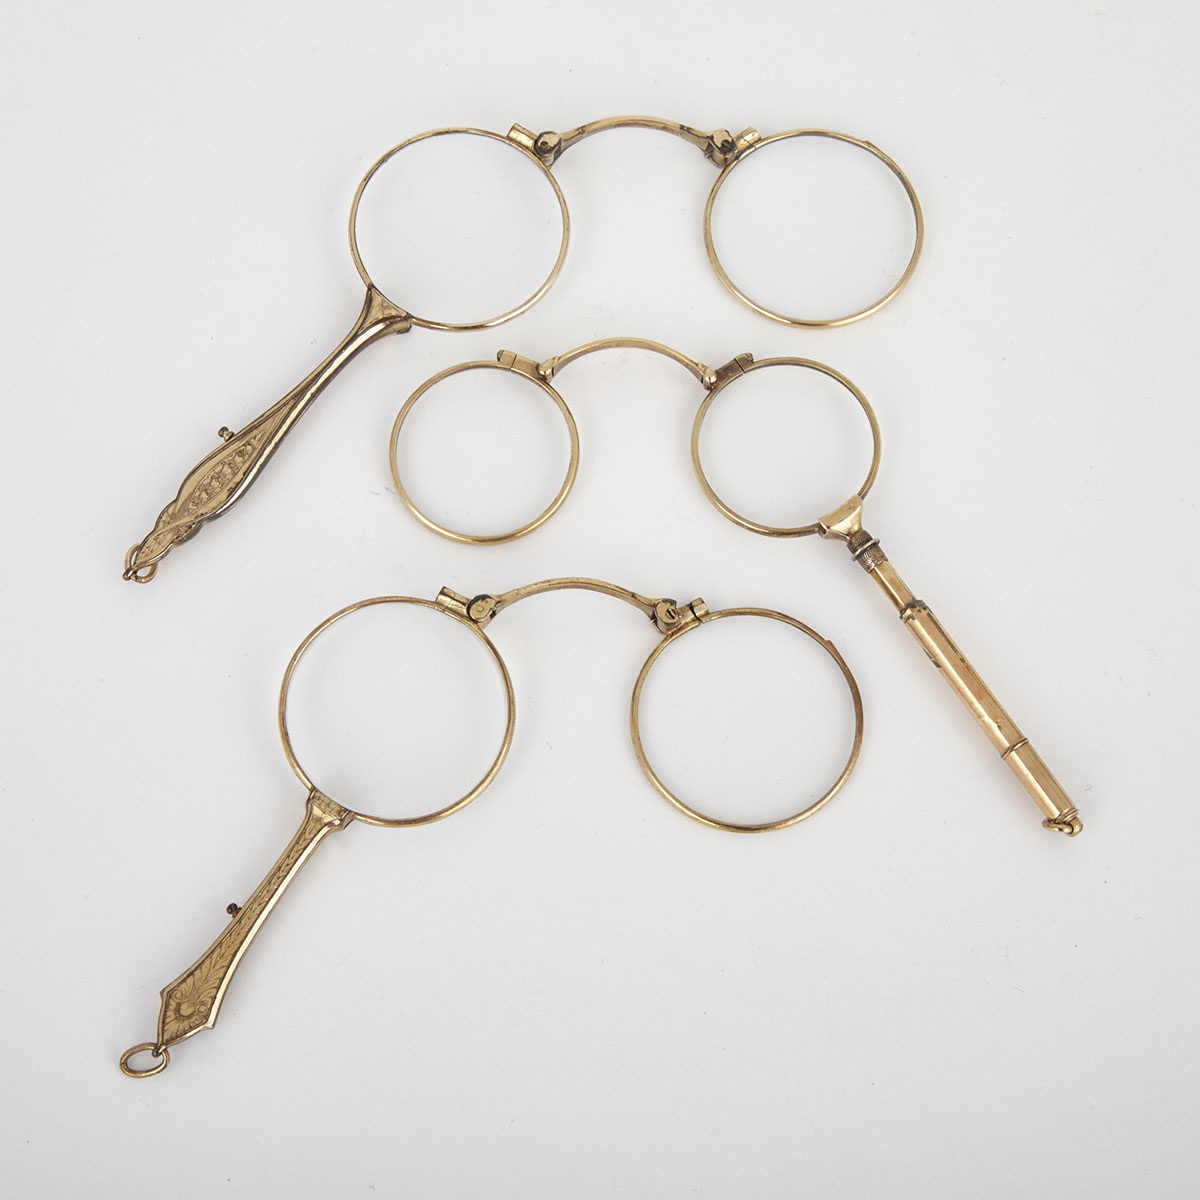 Three Victorian Gold Filled Lorgnettes, 19th century